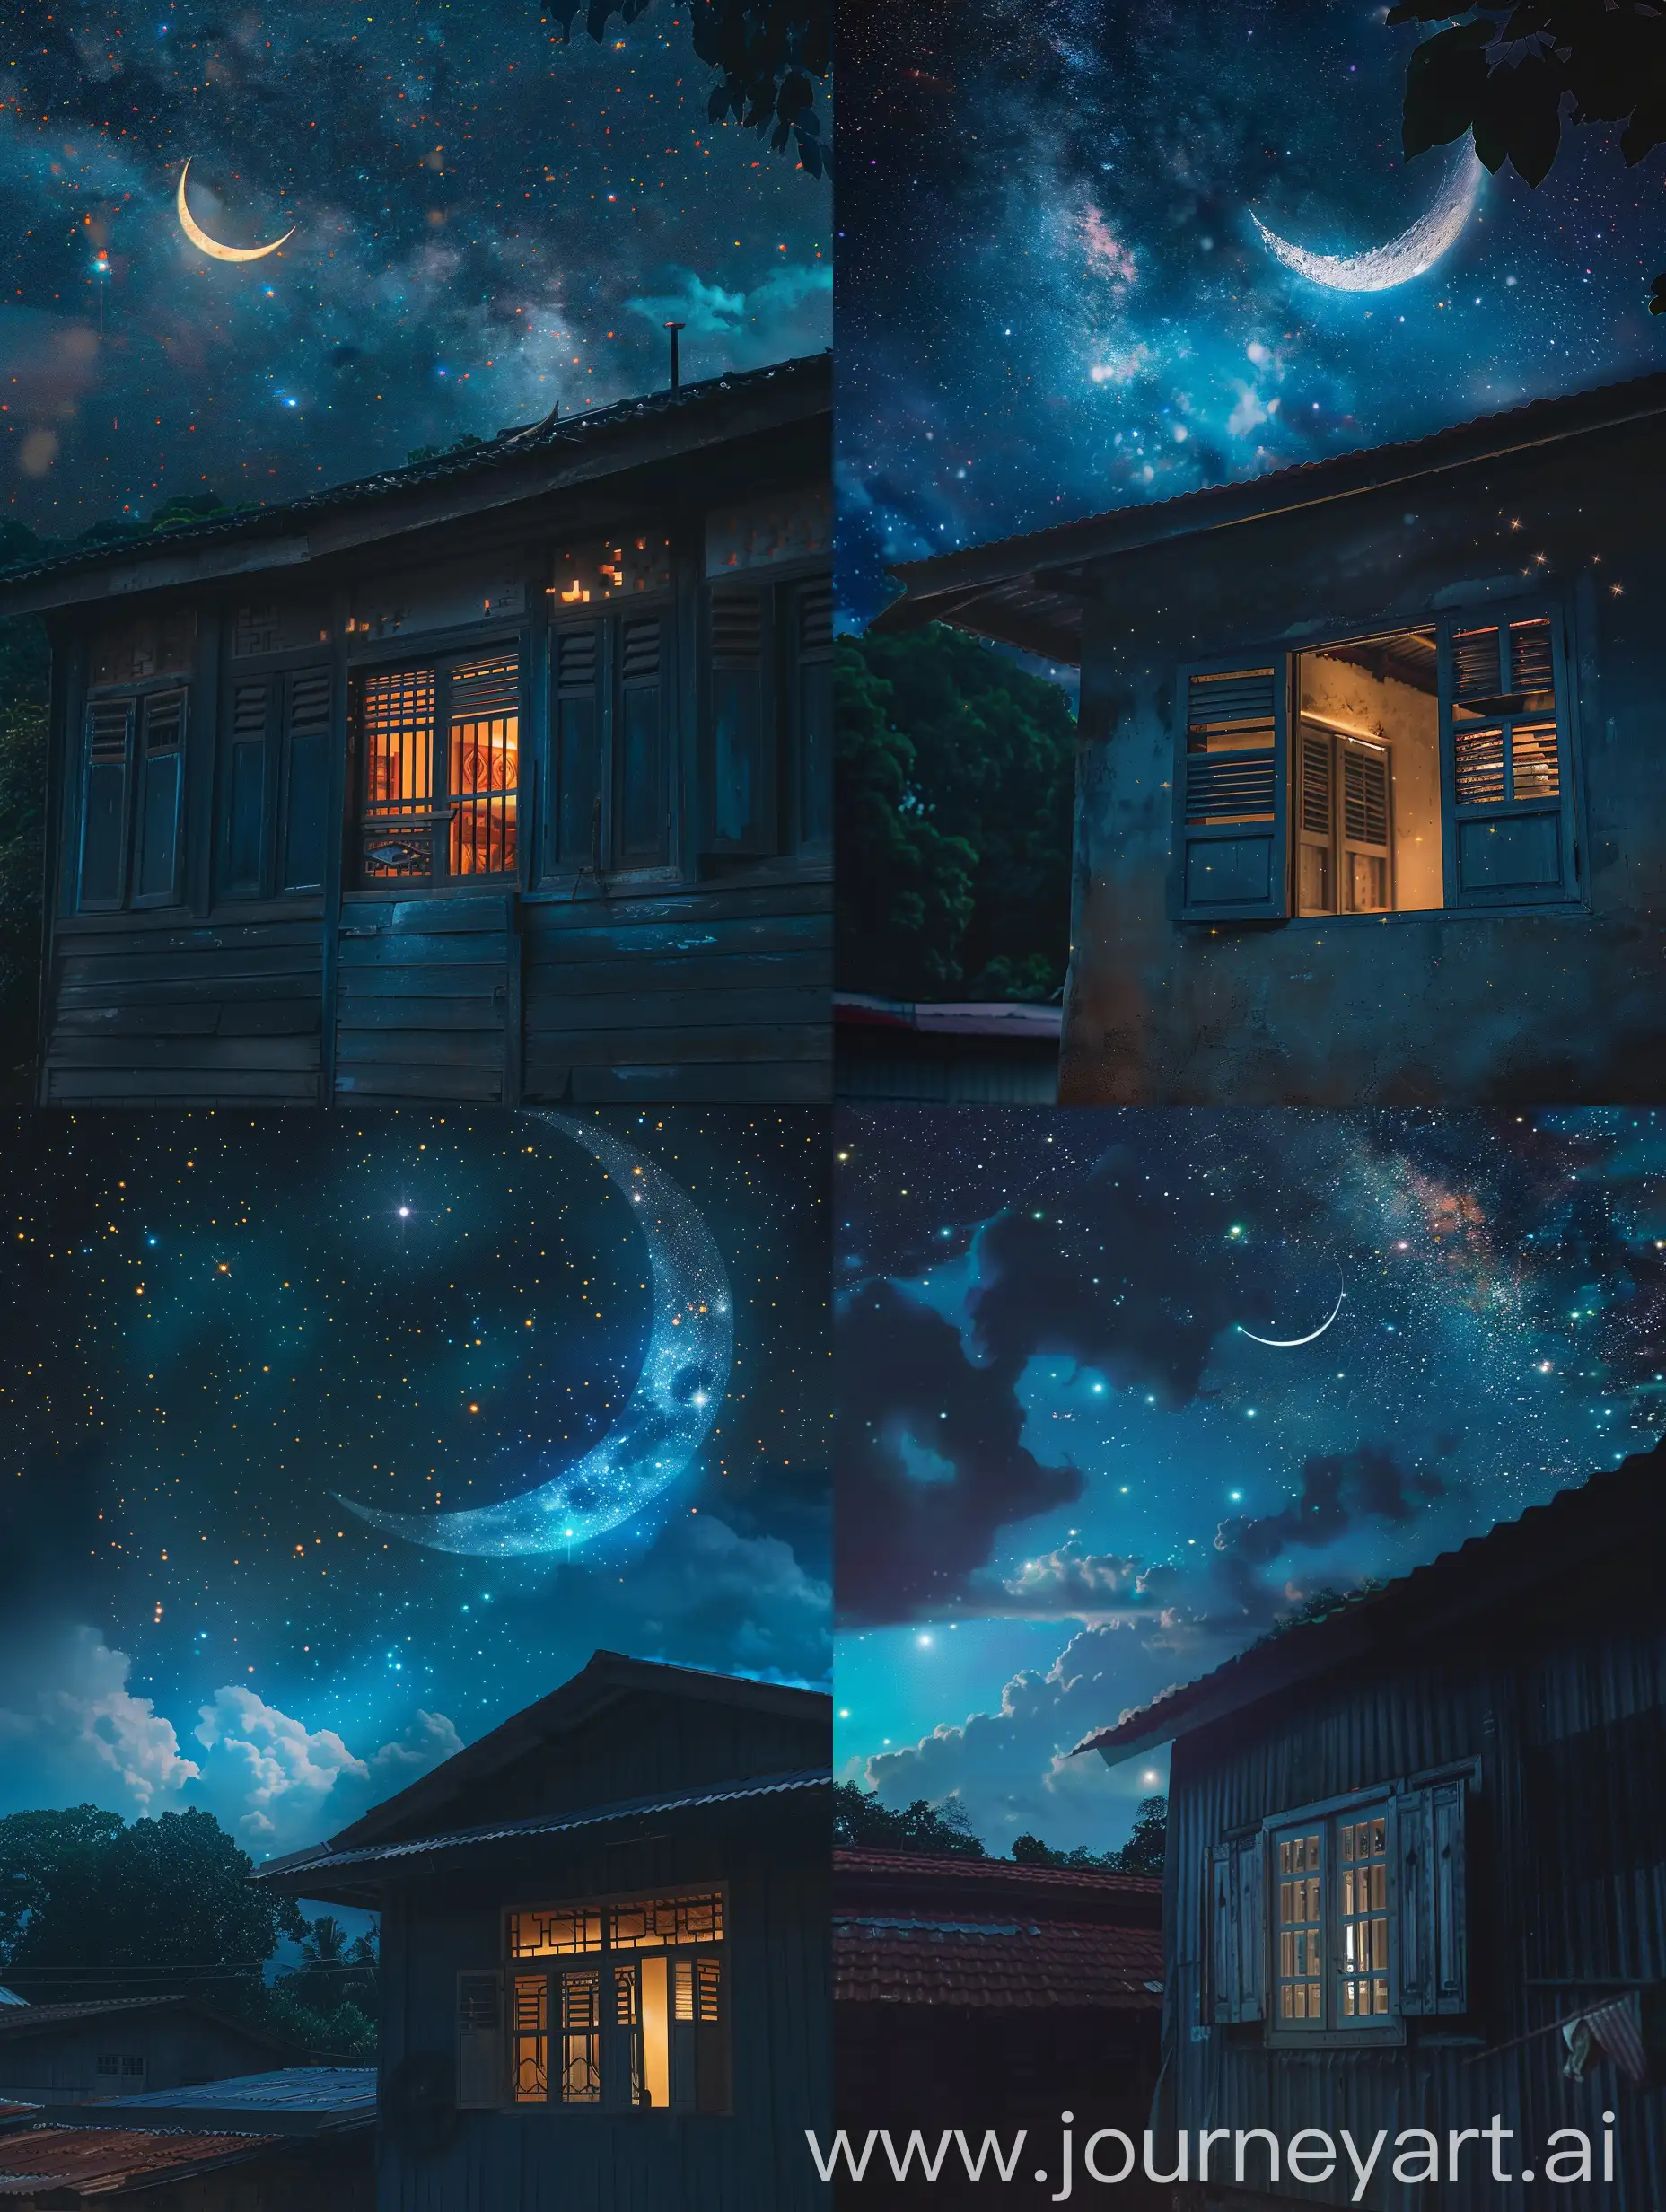 ultra realistic. night atmosphere The sky is lit by the crescent moon and stars. the background of a Malay village house. the window is open and there is light from inside the house. canon eos-id x mark iii dslr --v 6.0